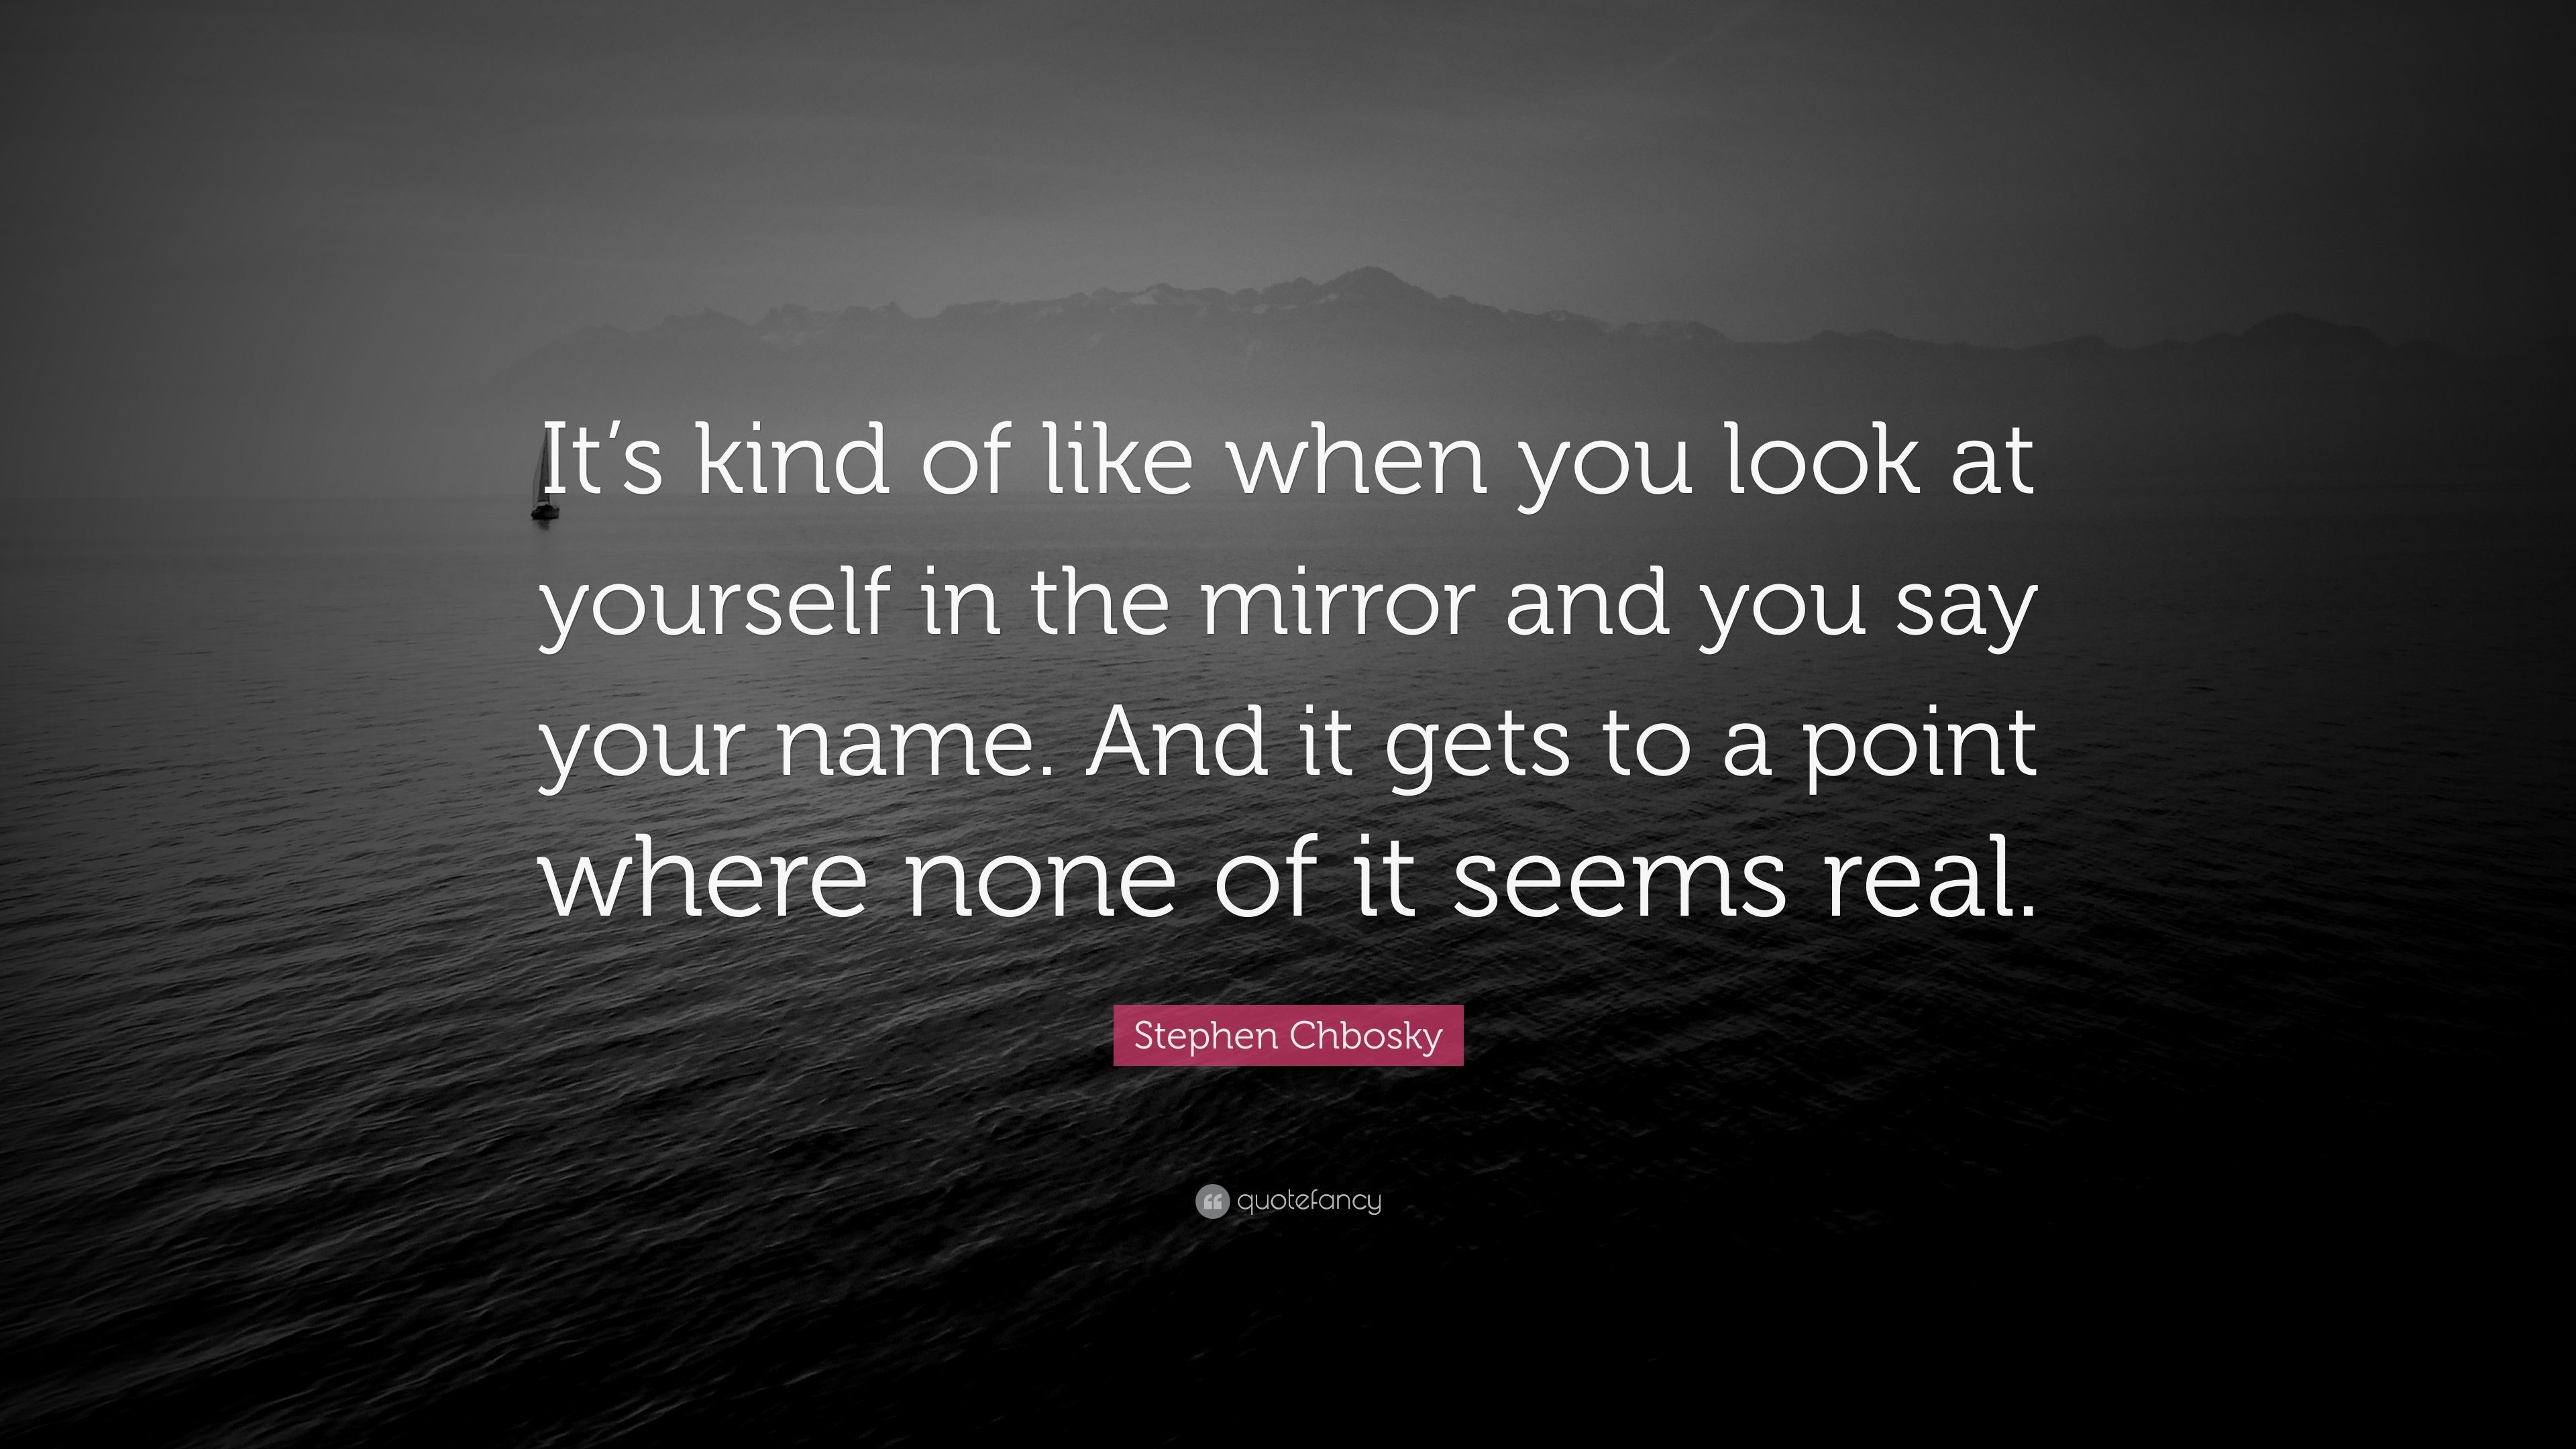 Stephen Chbosky Quote: "It's kind of like when you look at yourse...